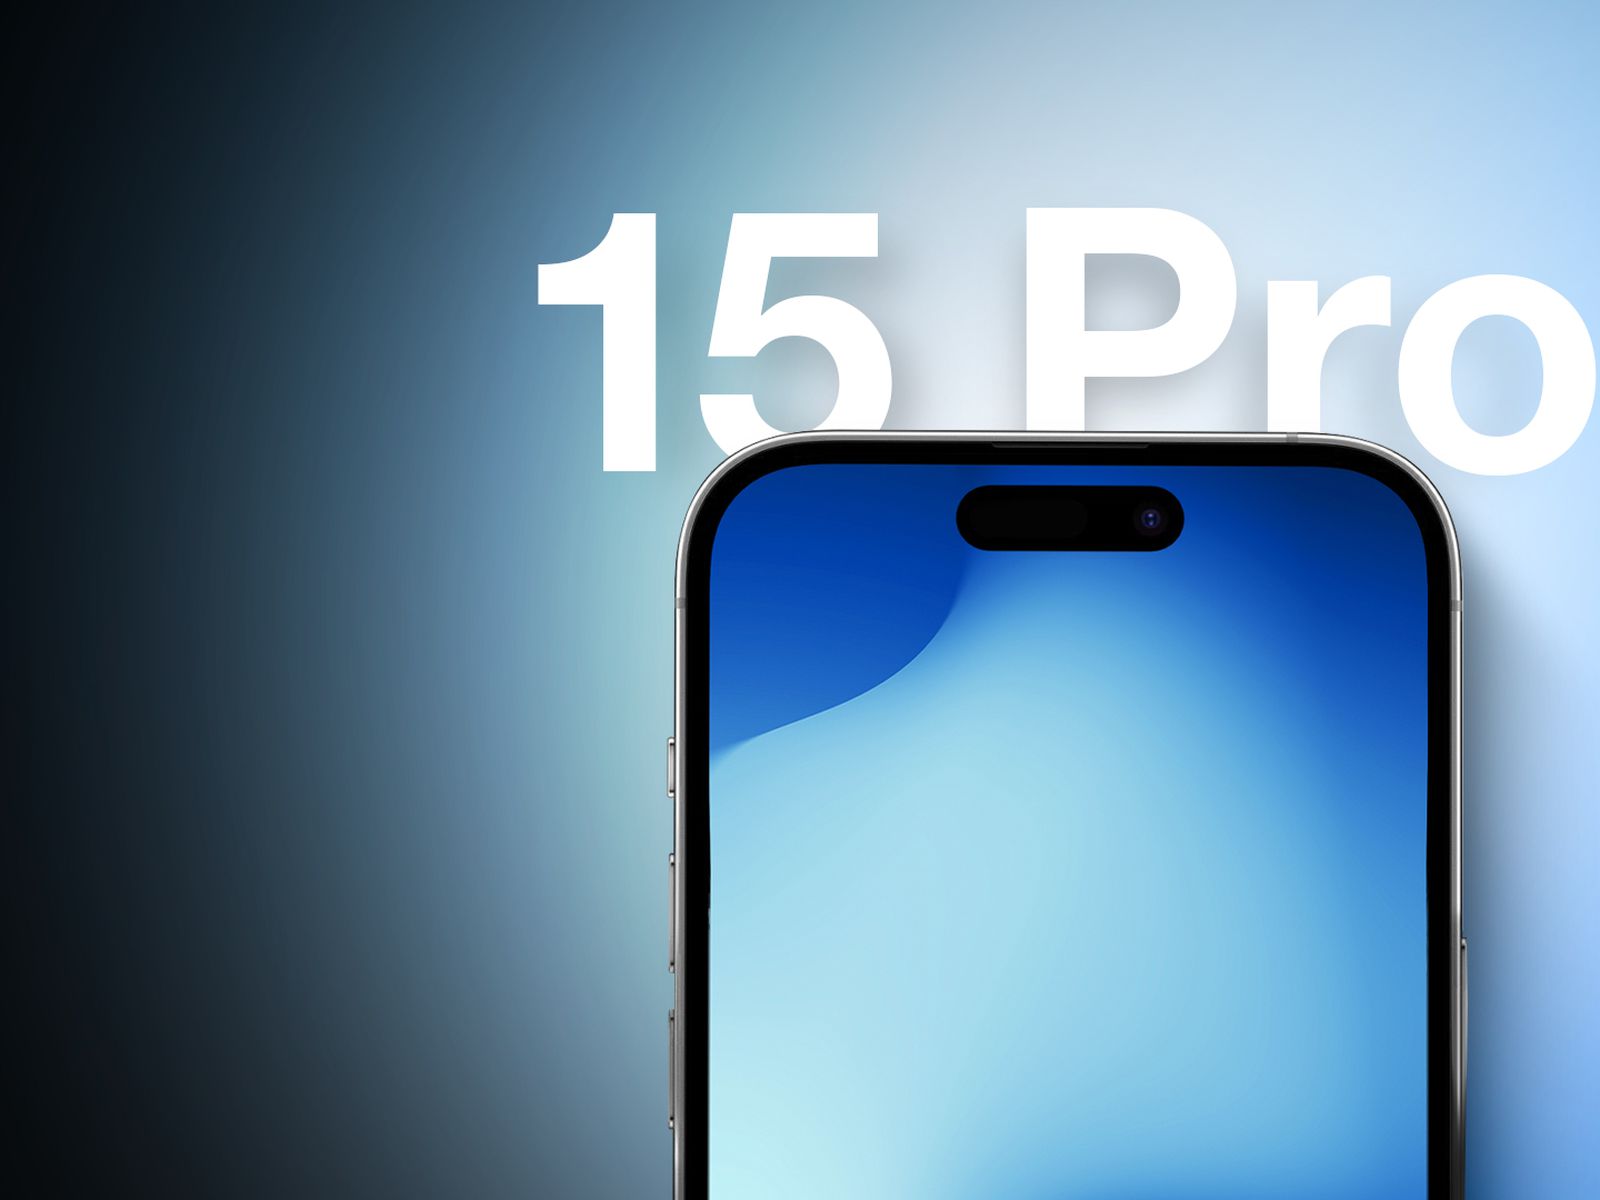 iPhone 15 Pro Max review – a subtle shift into the future